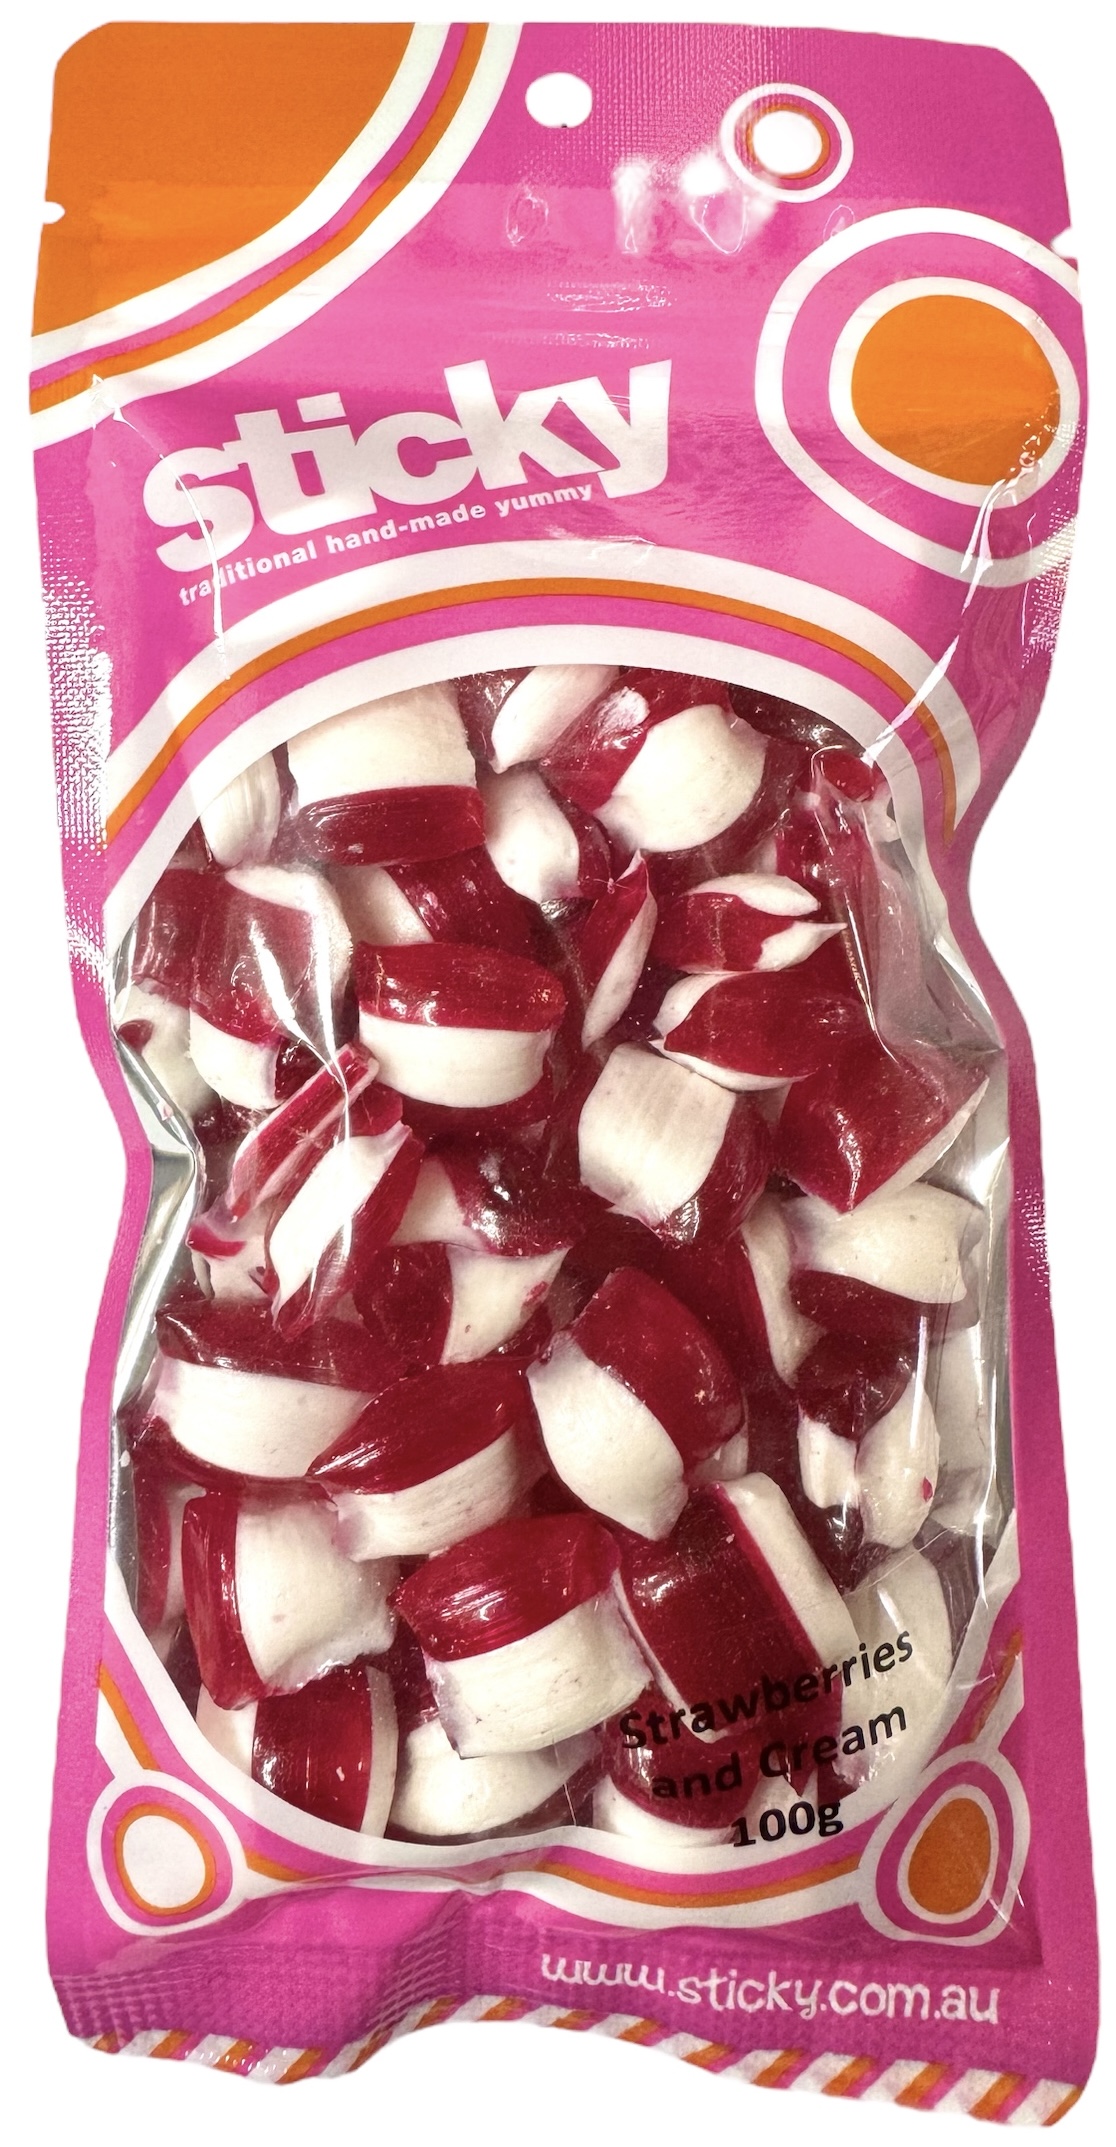 Strawberries and Cream Pillows - 100g Retail Bag